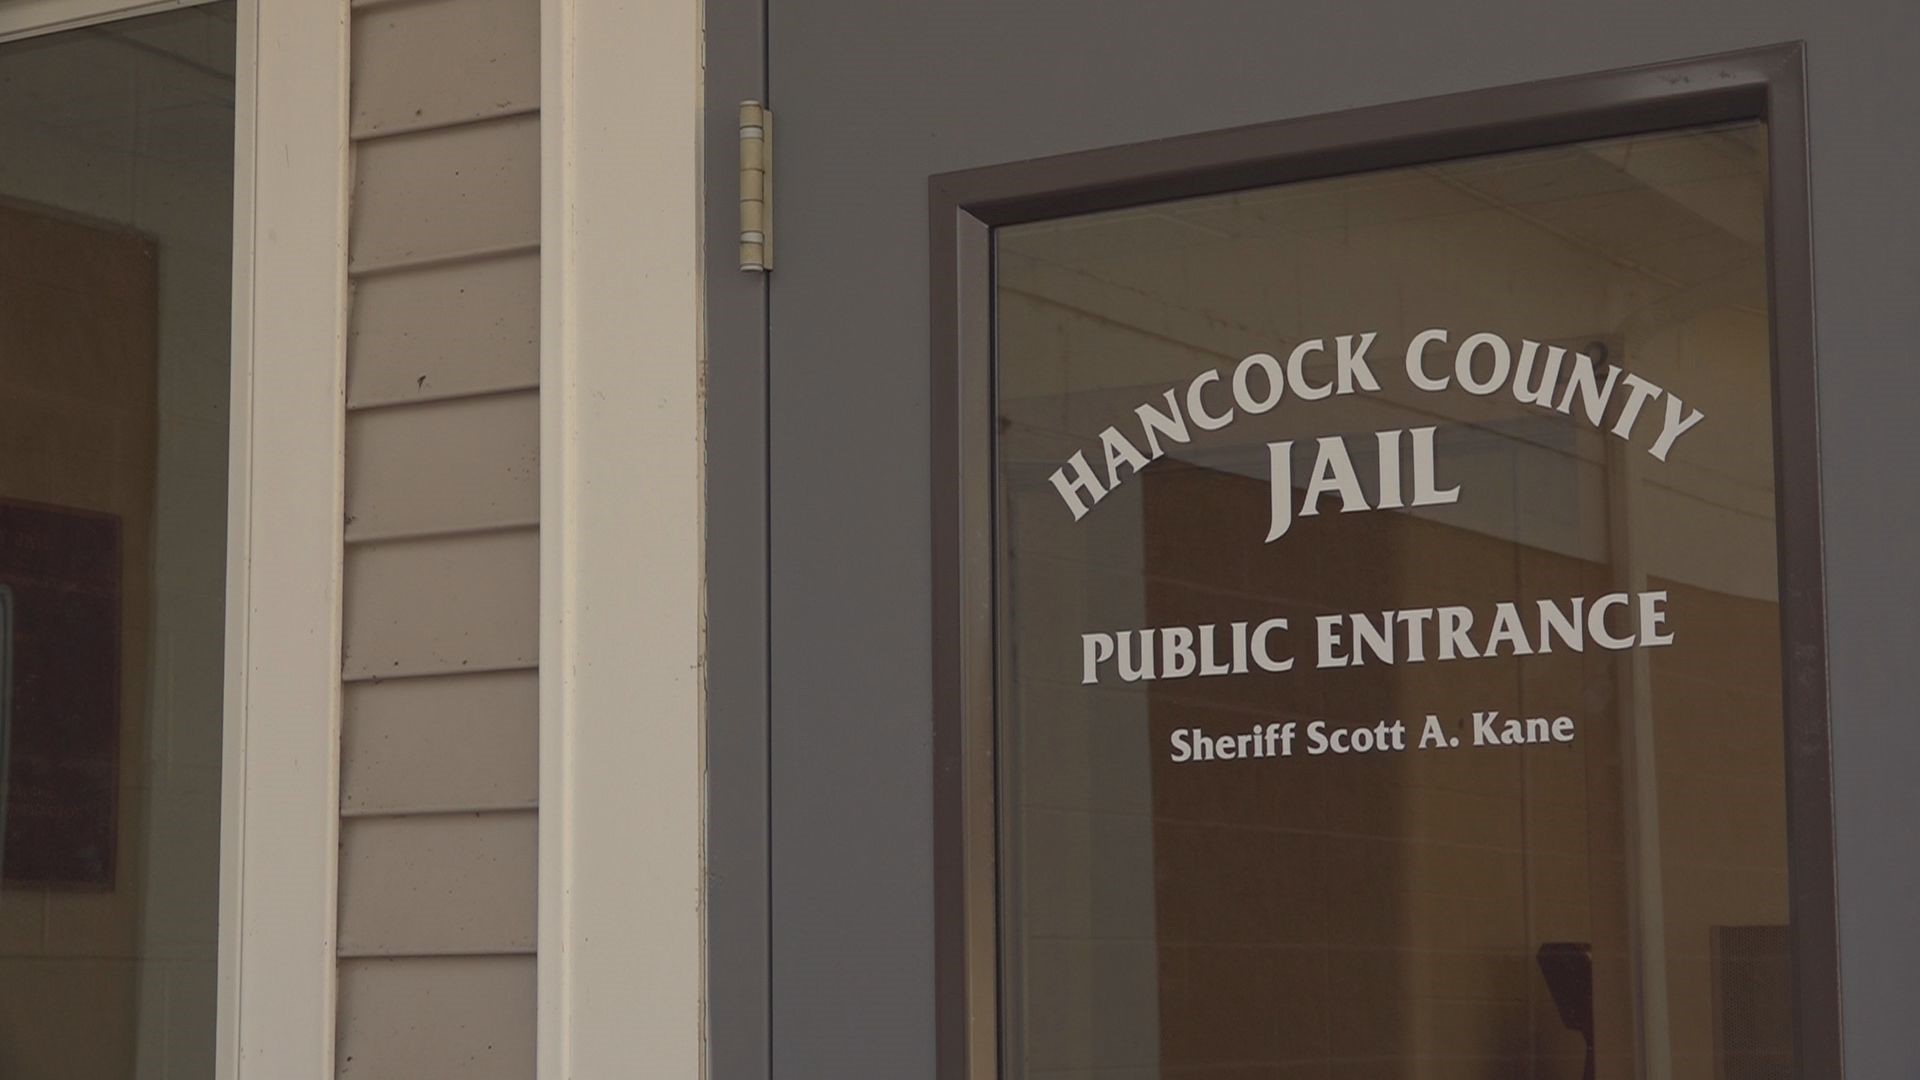 The Hancock County Jail is implementing the Securus tablet program by March or April -- all in an effort to enhance safety at the facility.